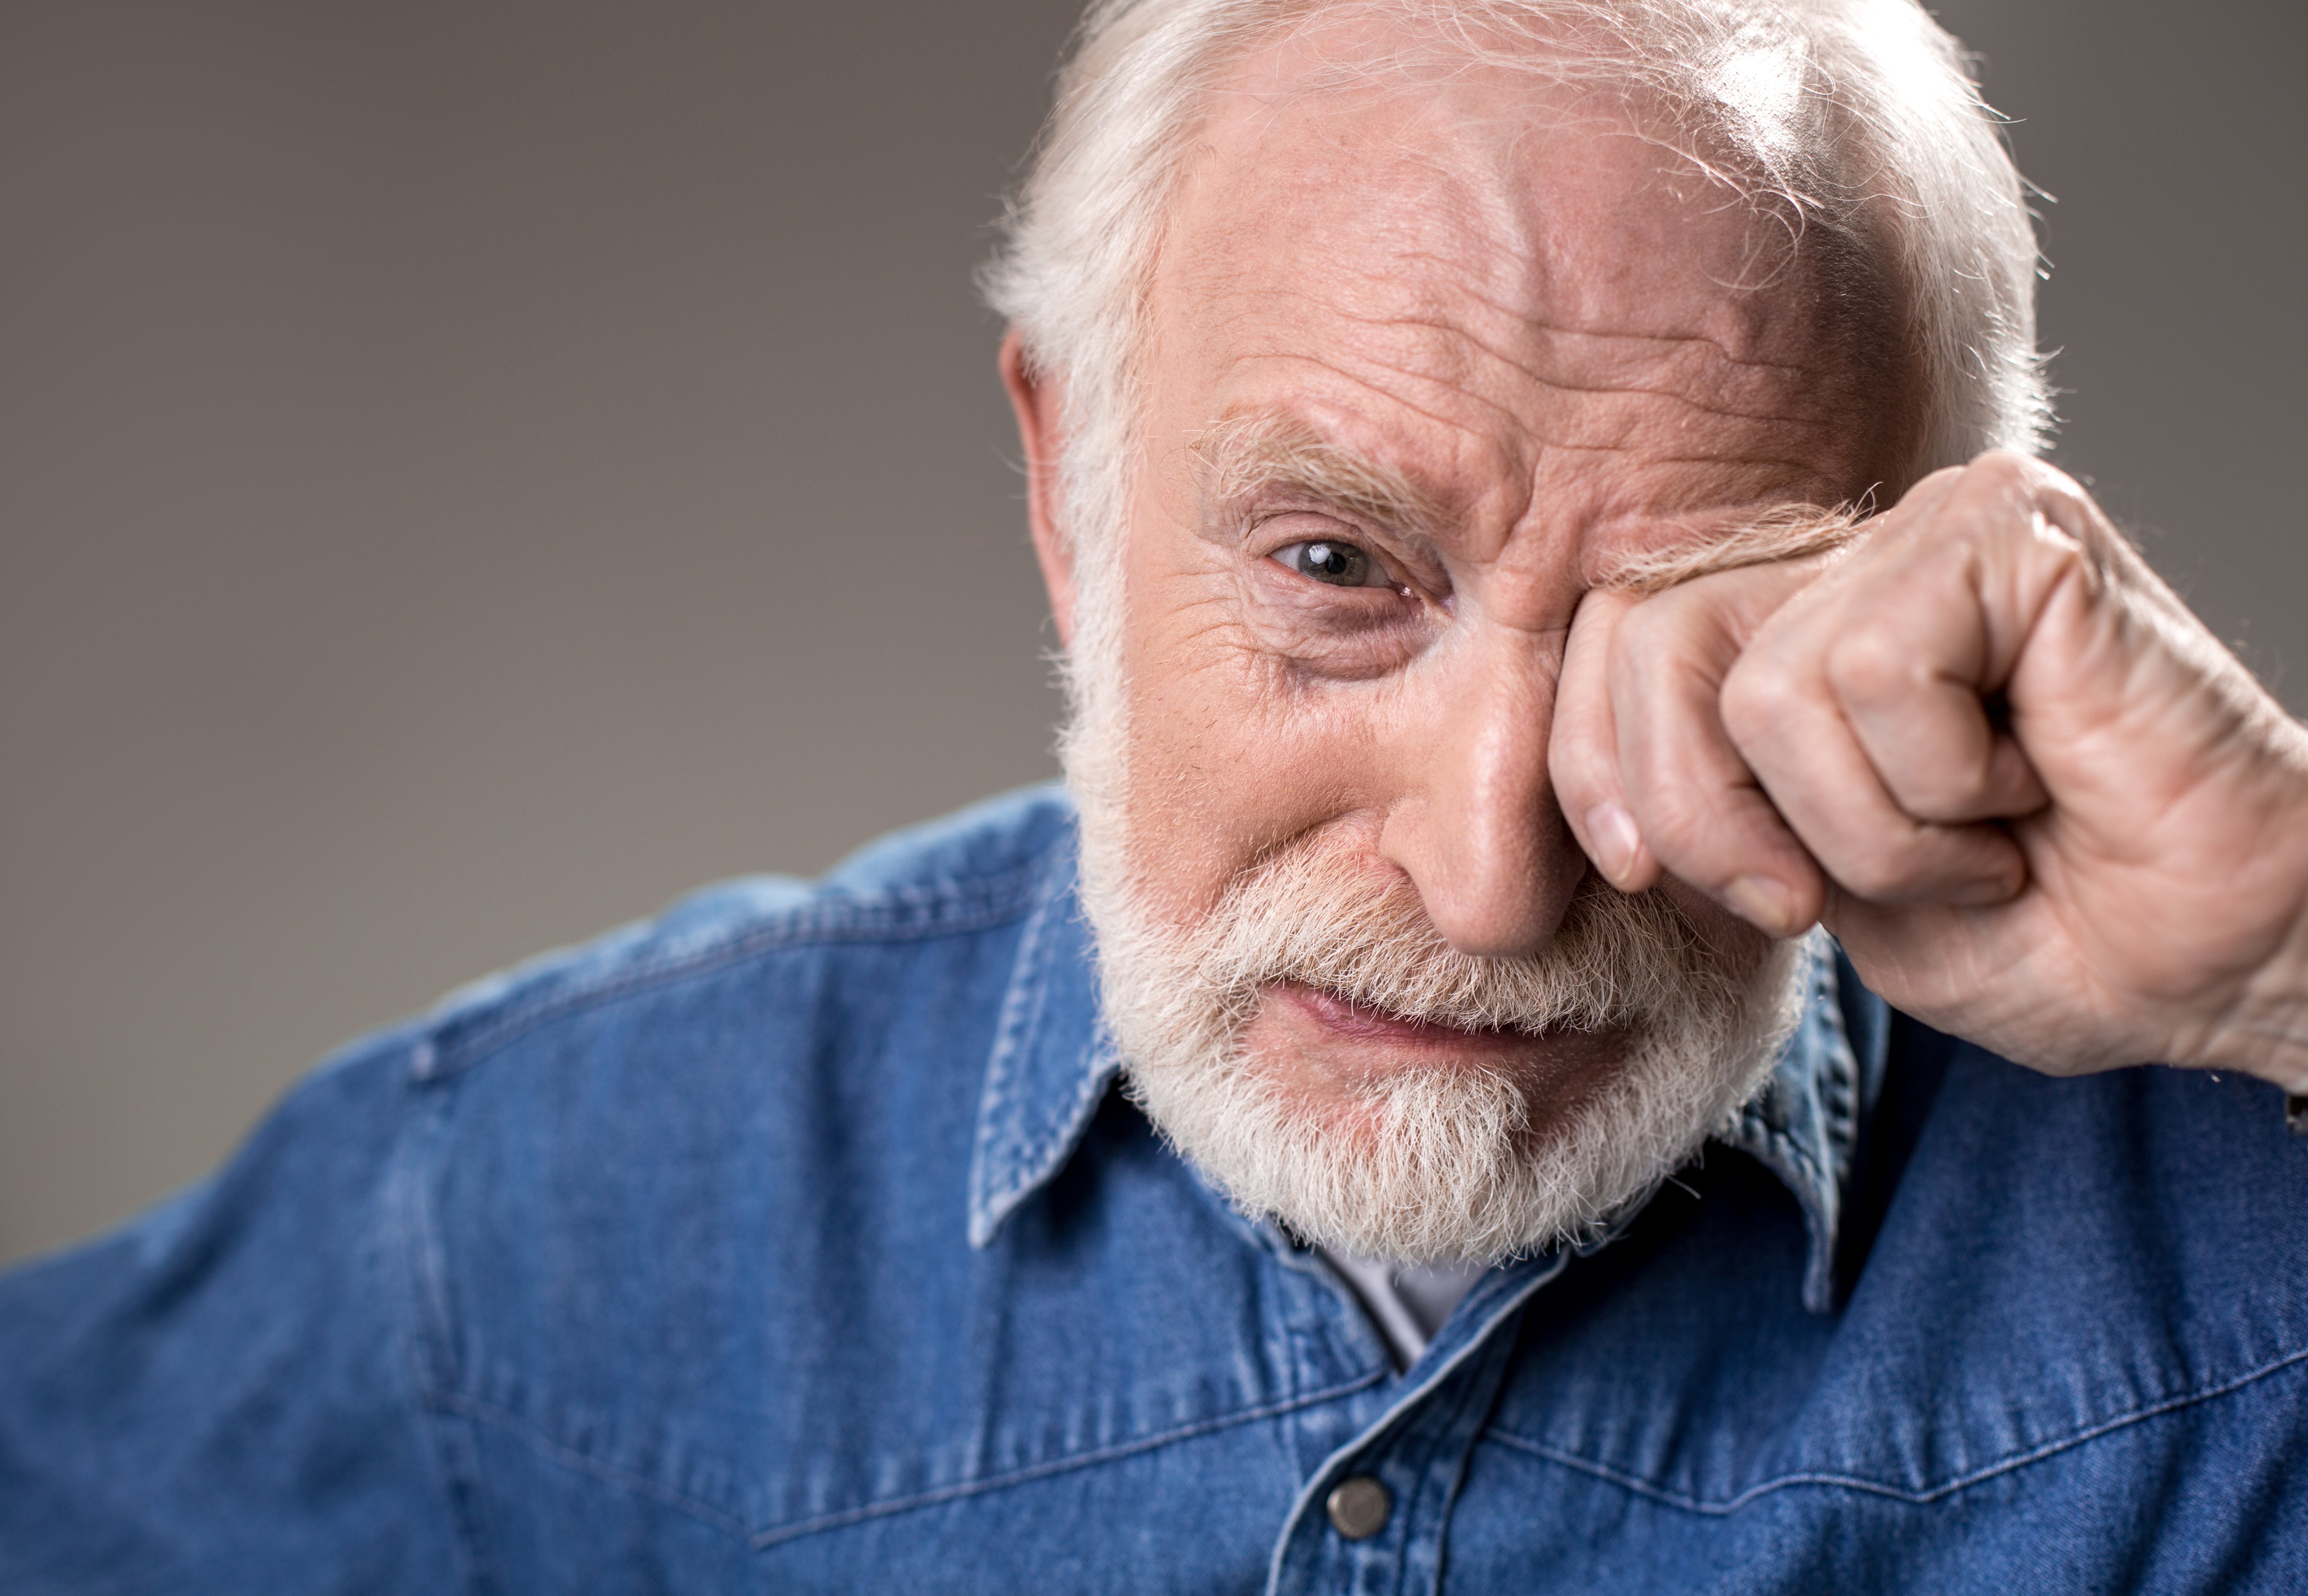 Older man in blue shirt covering one eye as he cries.|Source: Shutterstock